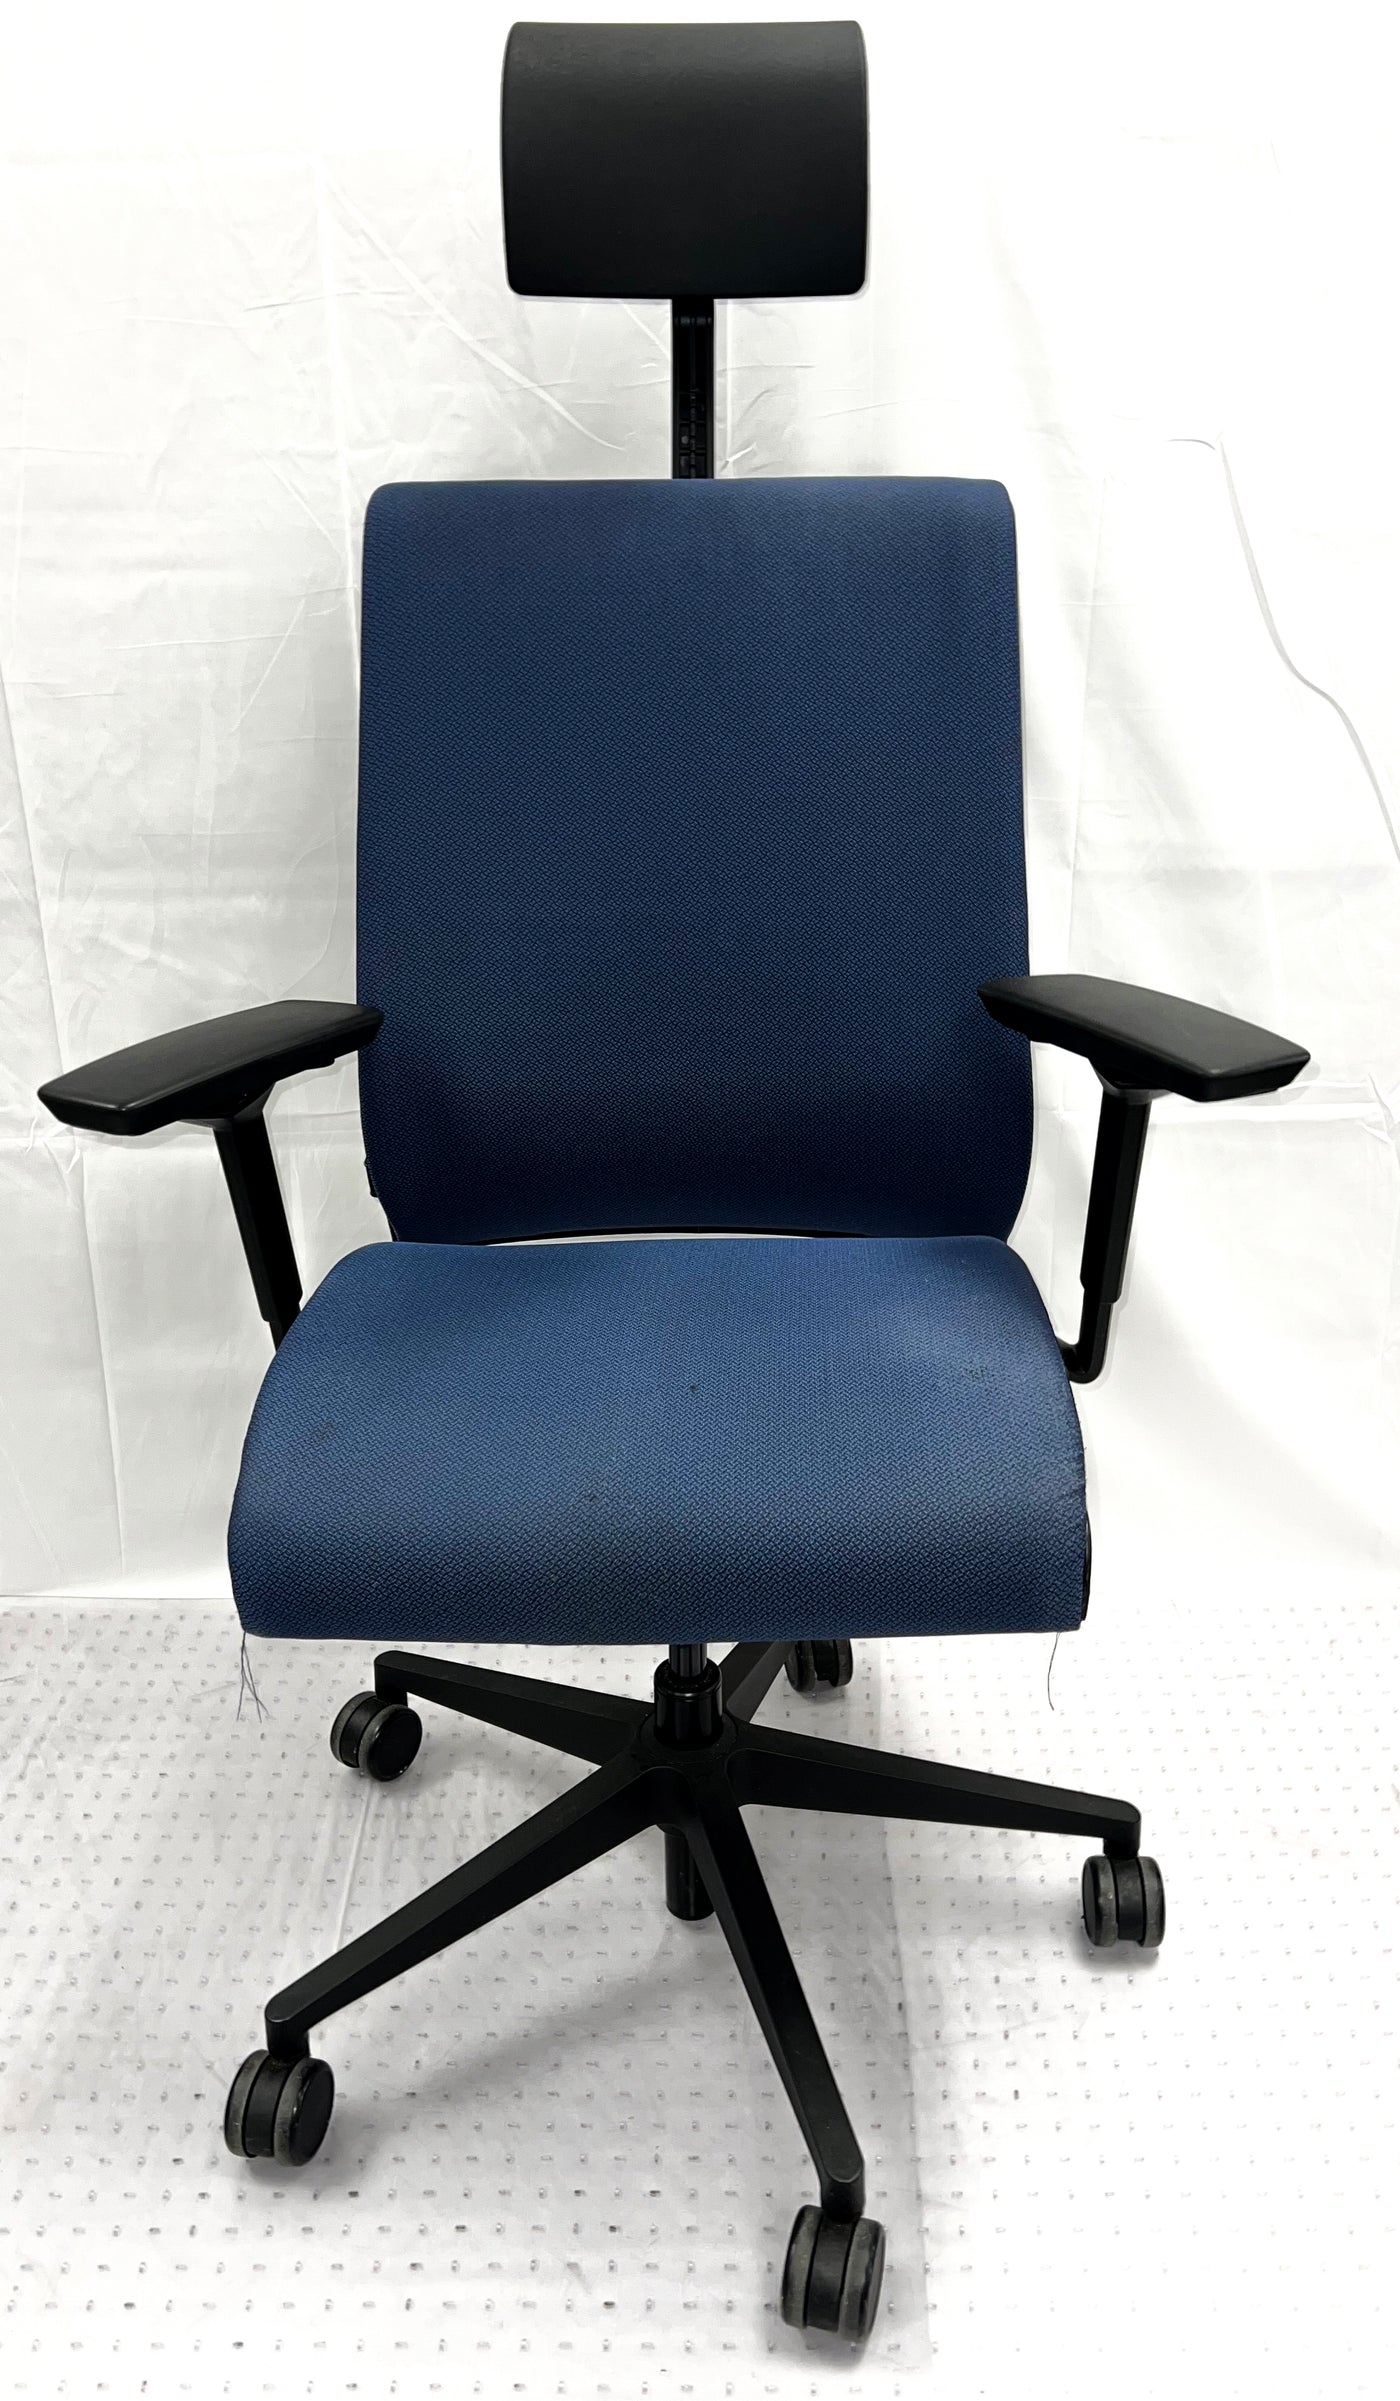 Pre Owned Steelcase Think with headrest